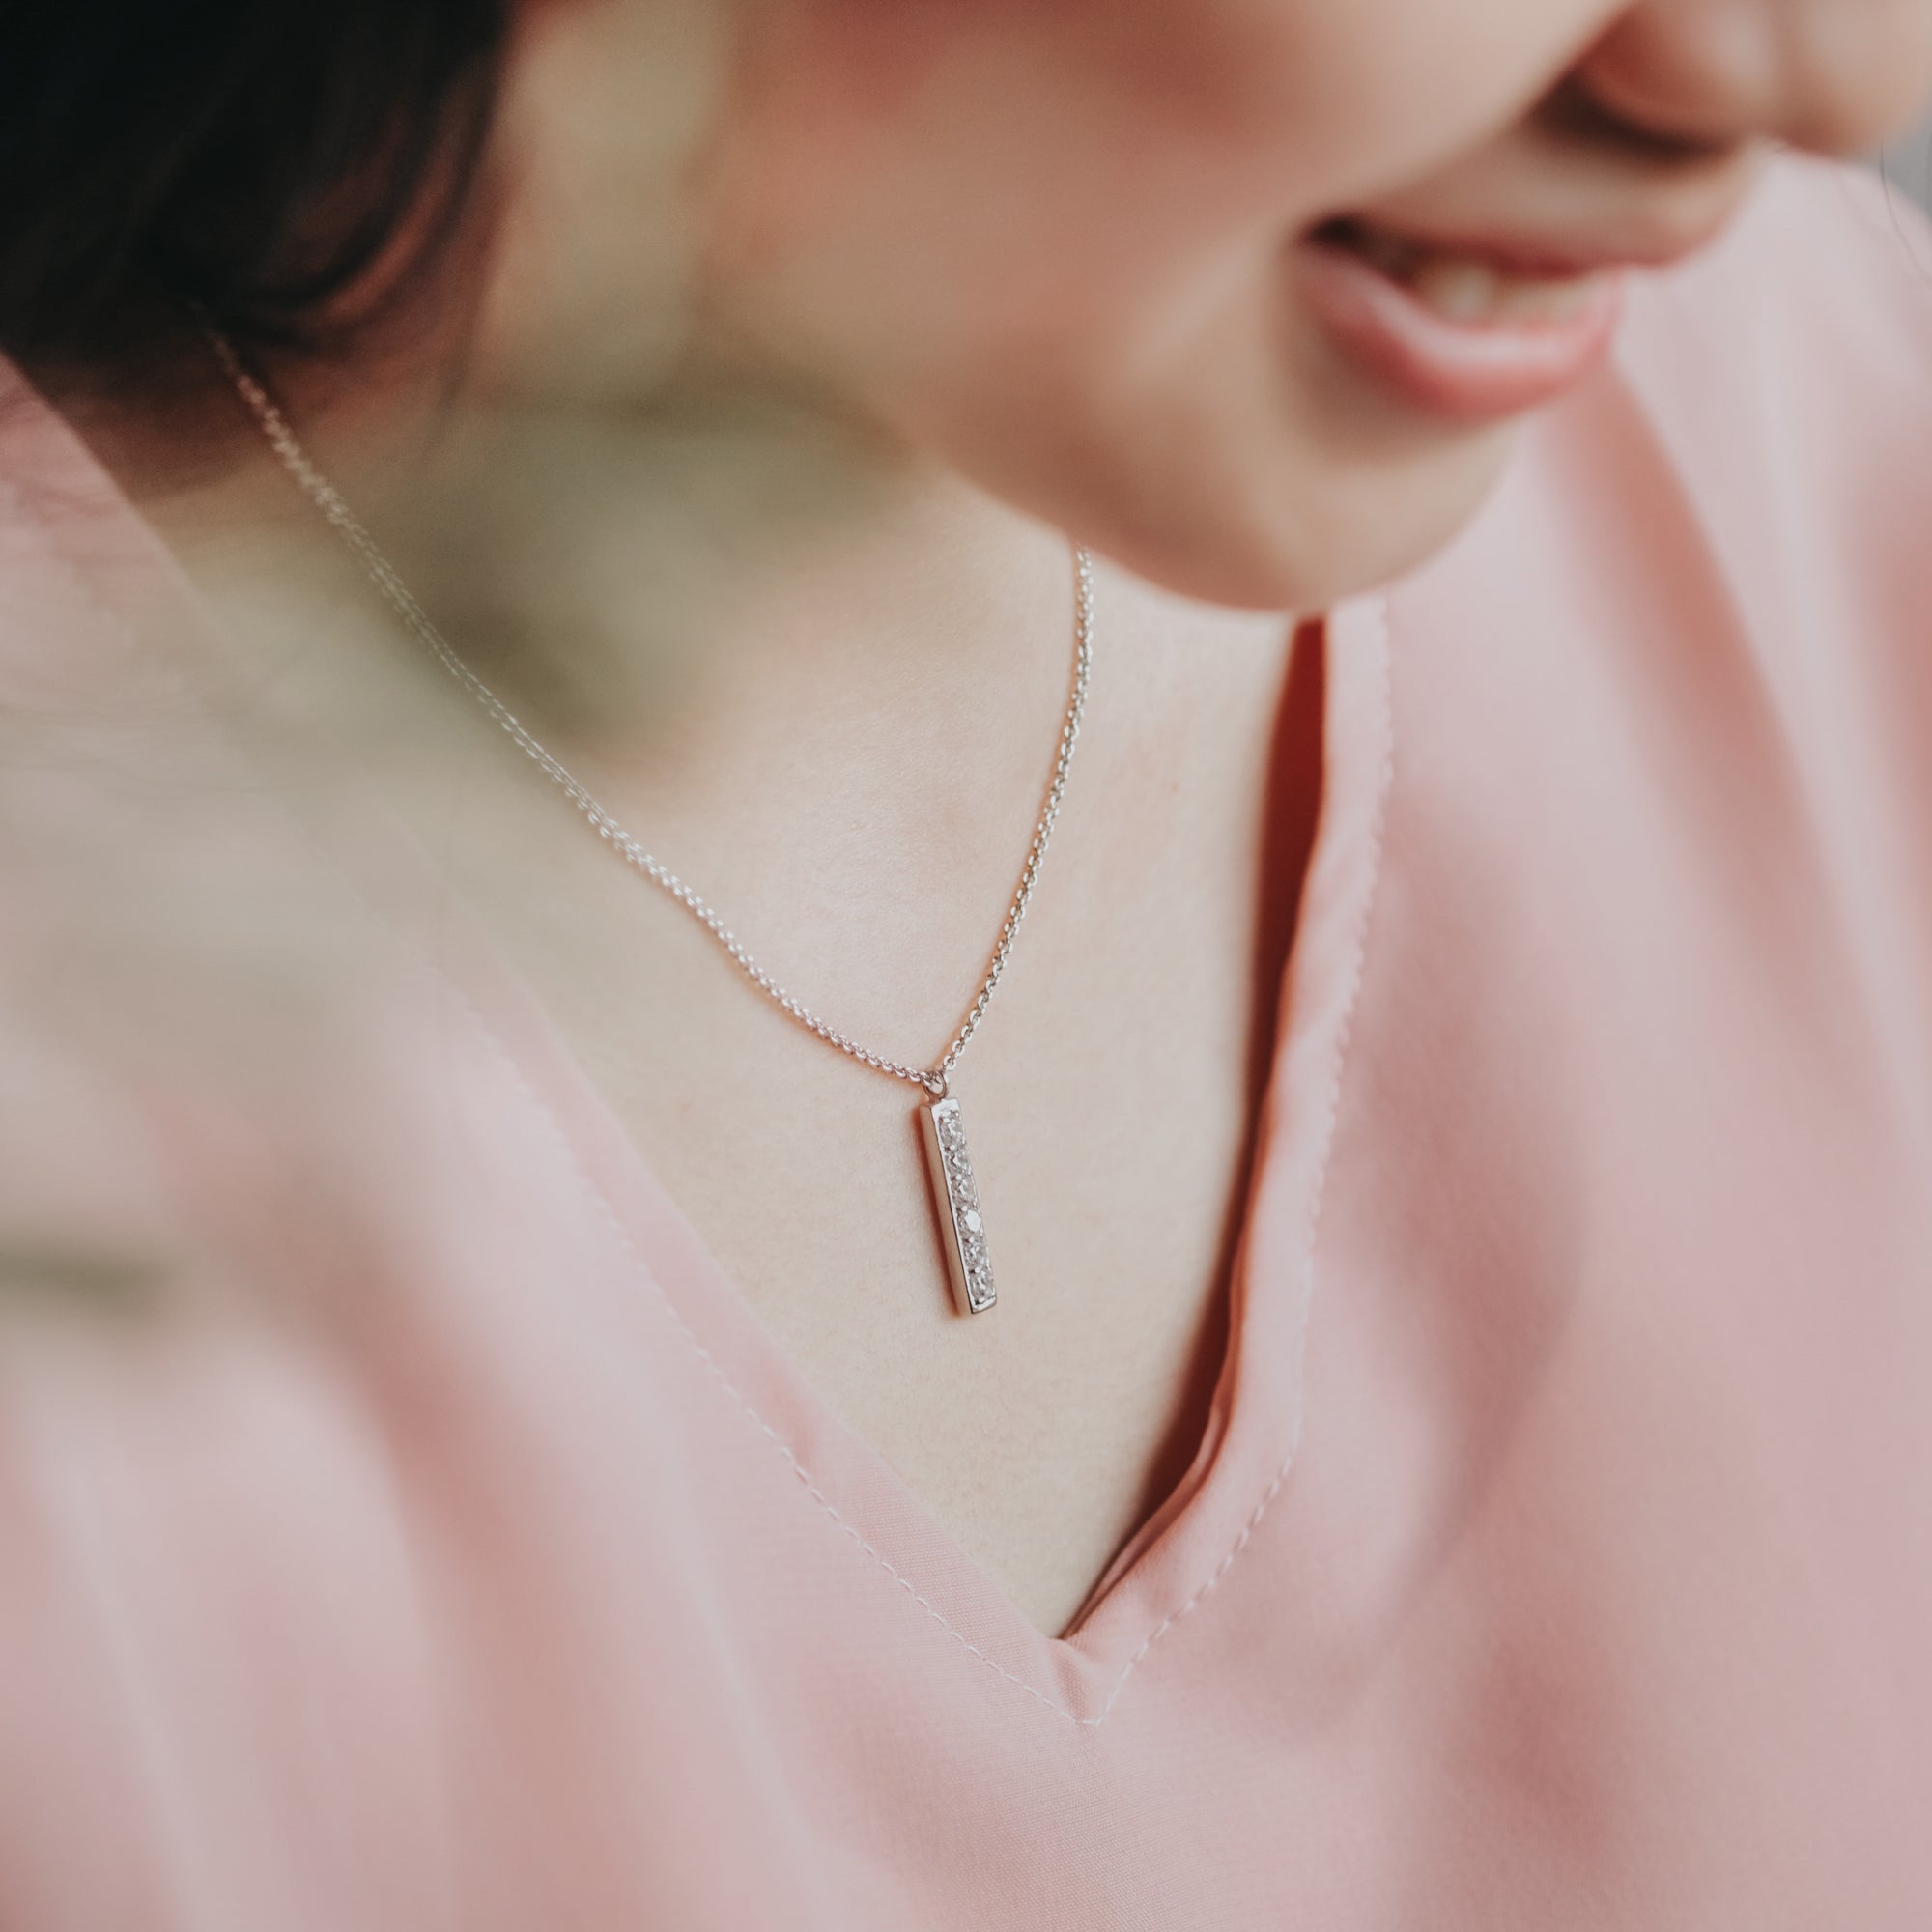 Minimalist Bar Drop Necklace in 925 Silver With White Zircon